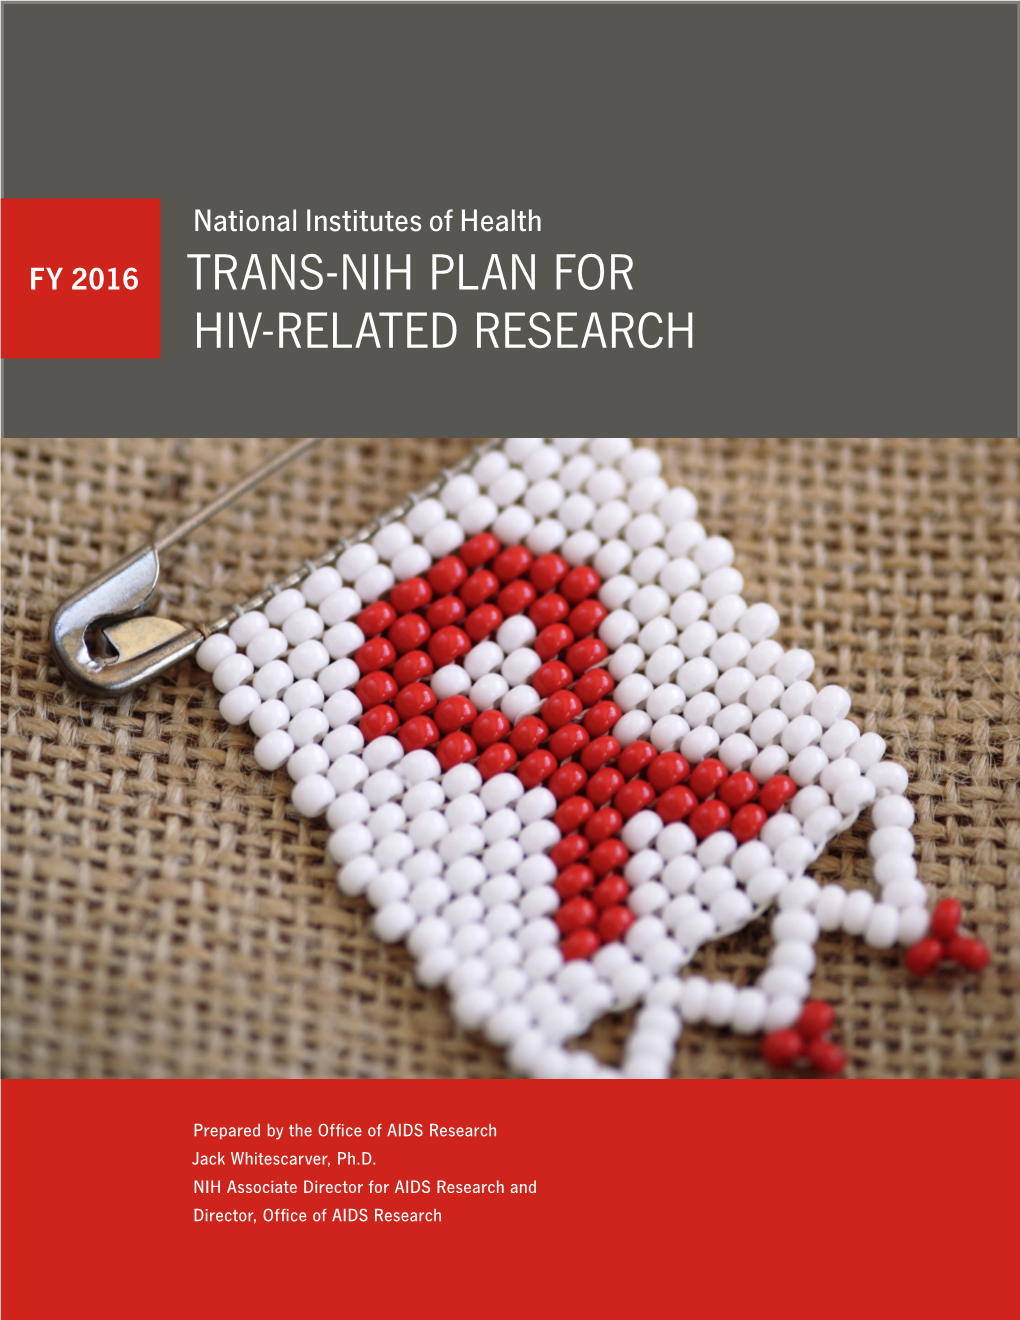 Fy 2016 Trans-Nih Plan for Hiv-Related Research